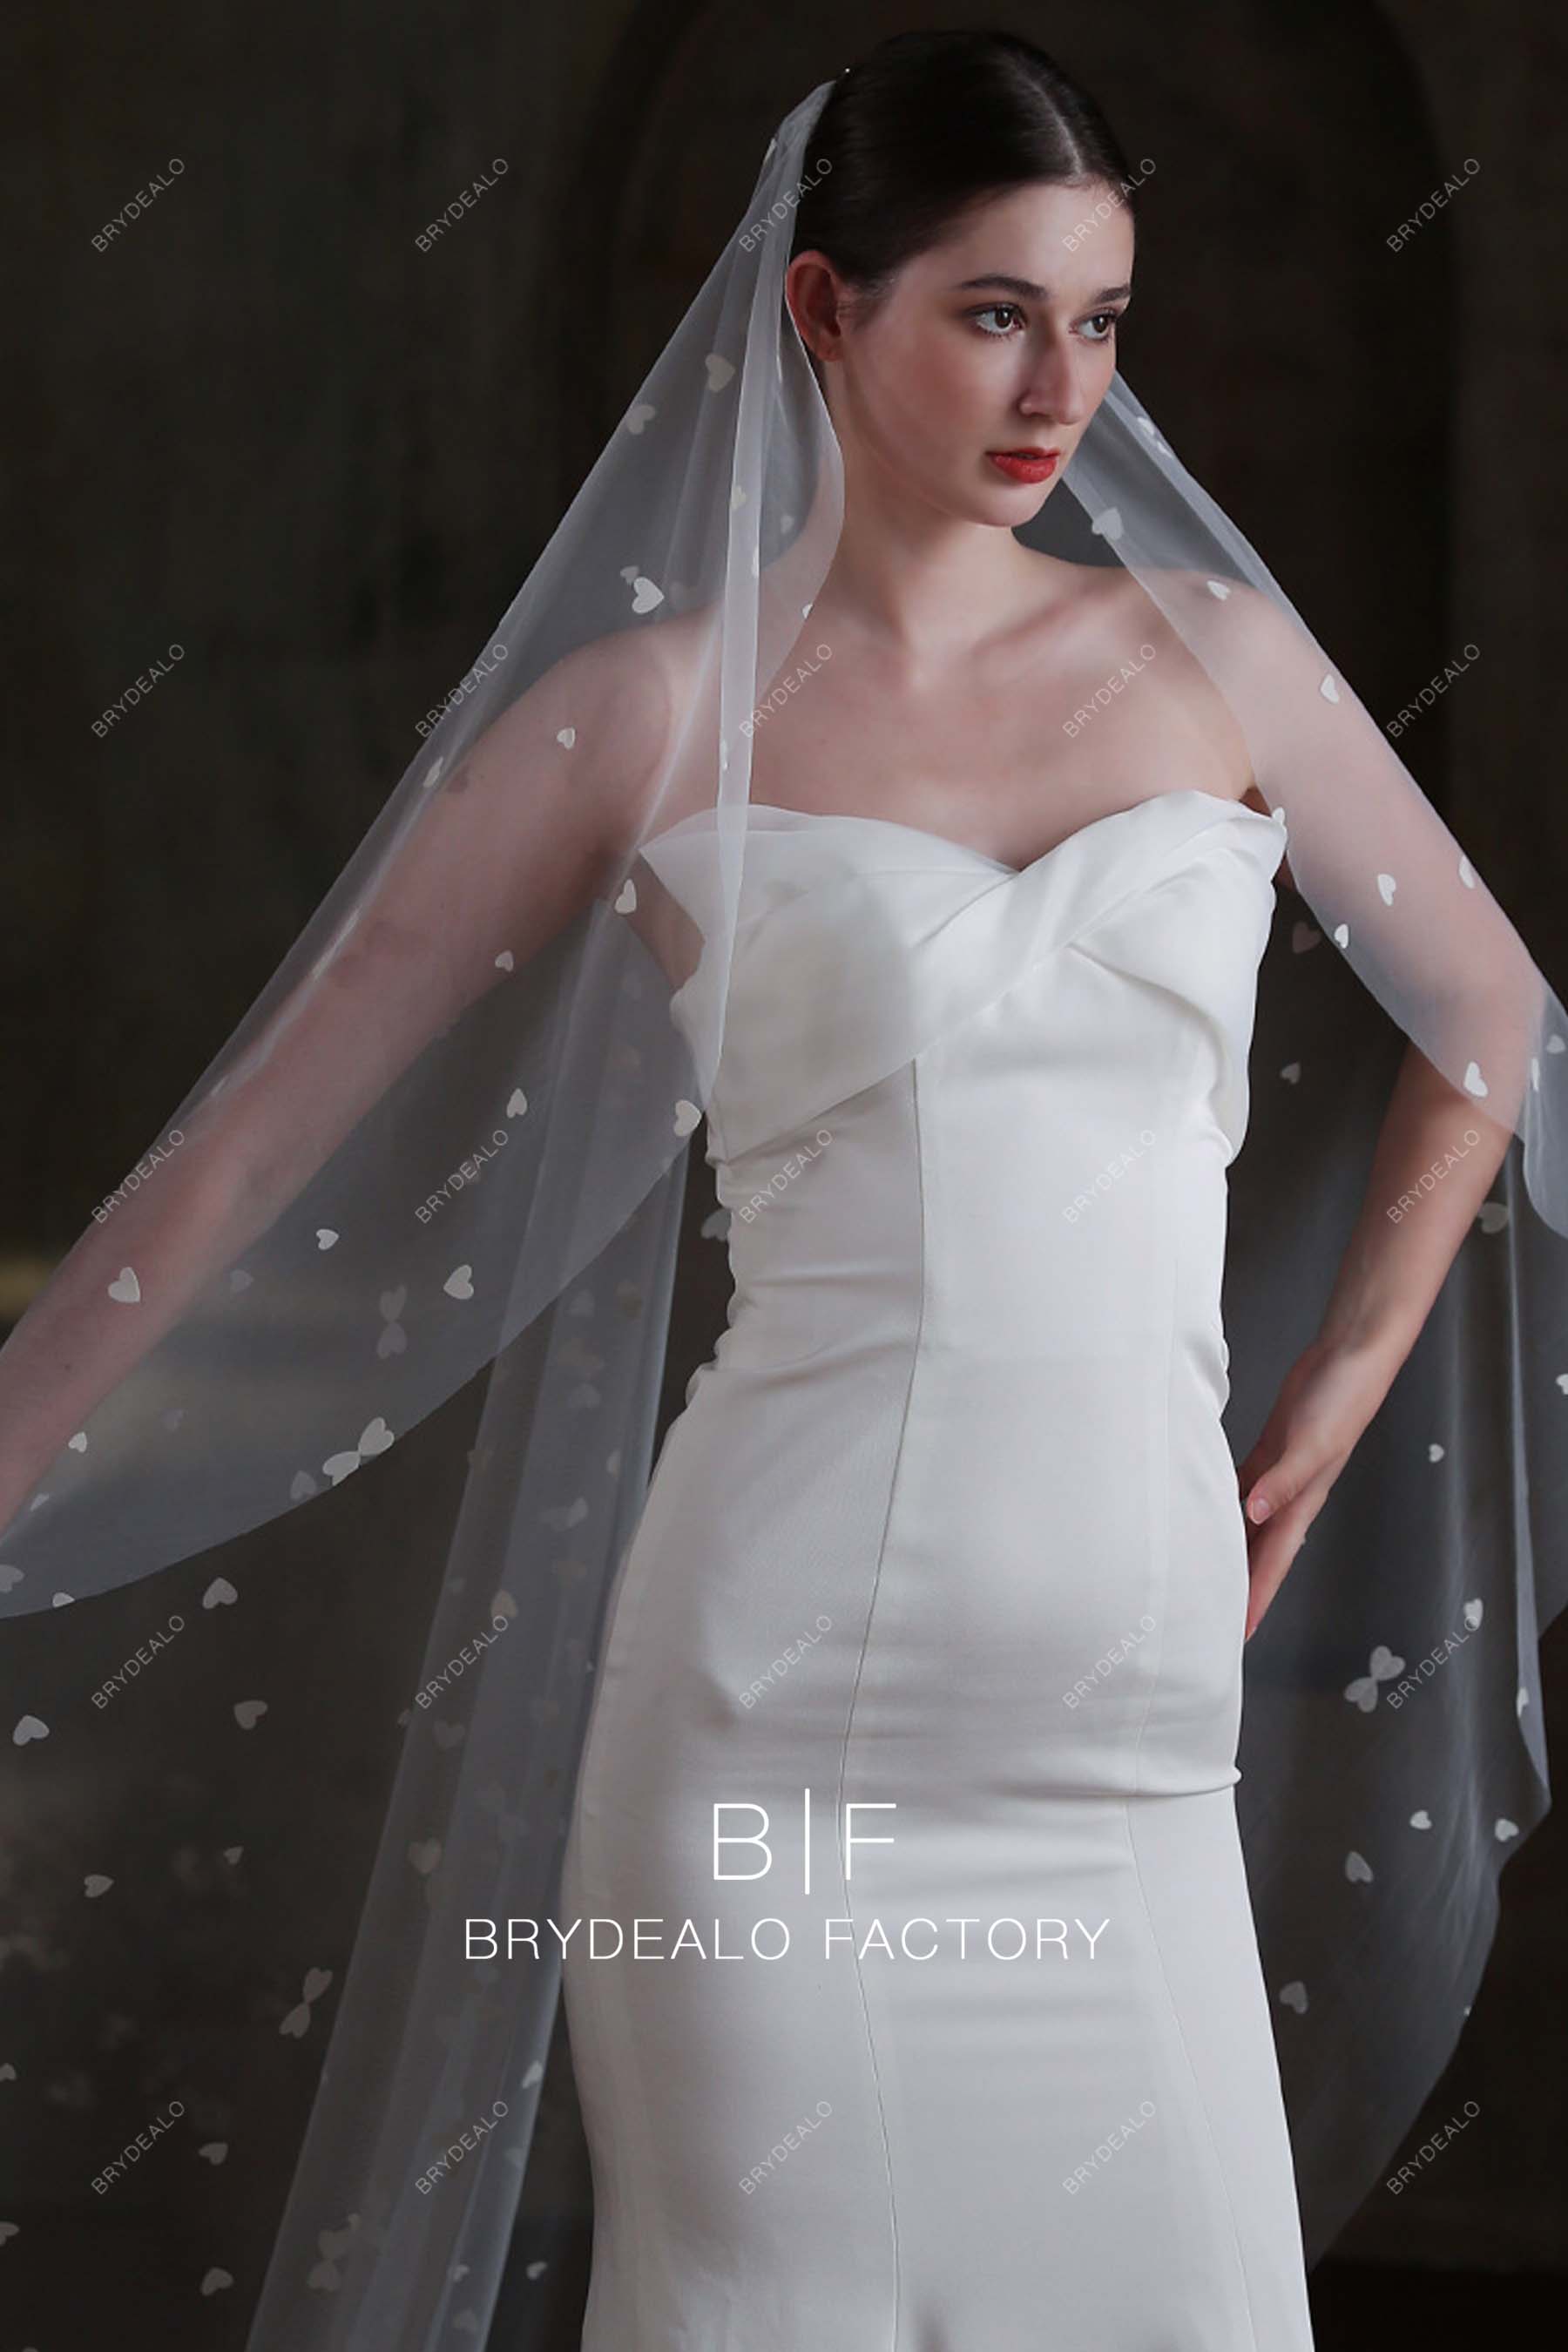 Best Heart-shaped Accent Bridal Veil for Wild Wedding